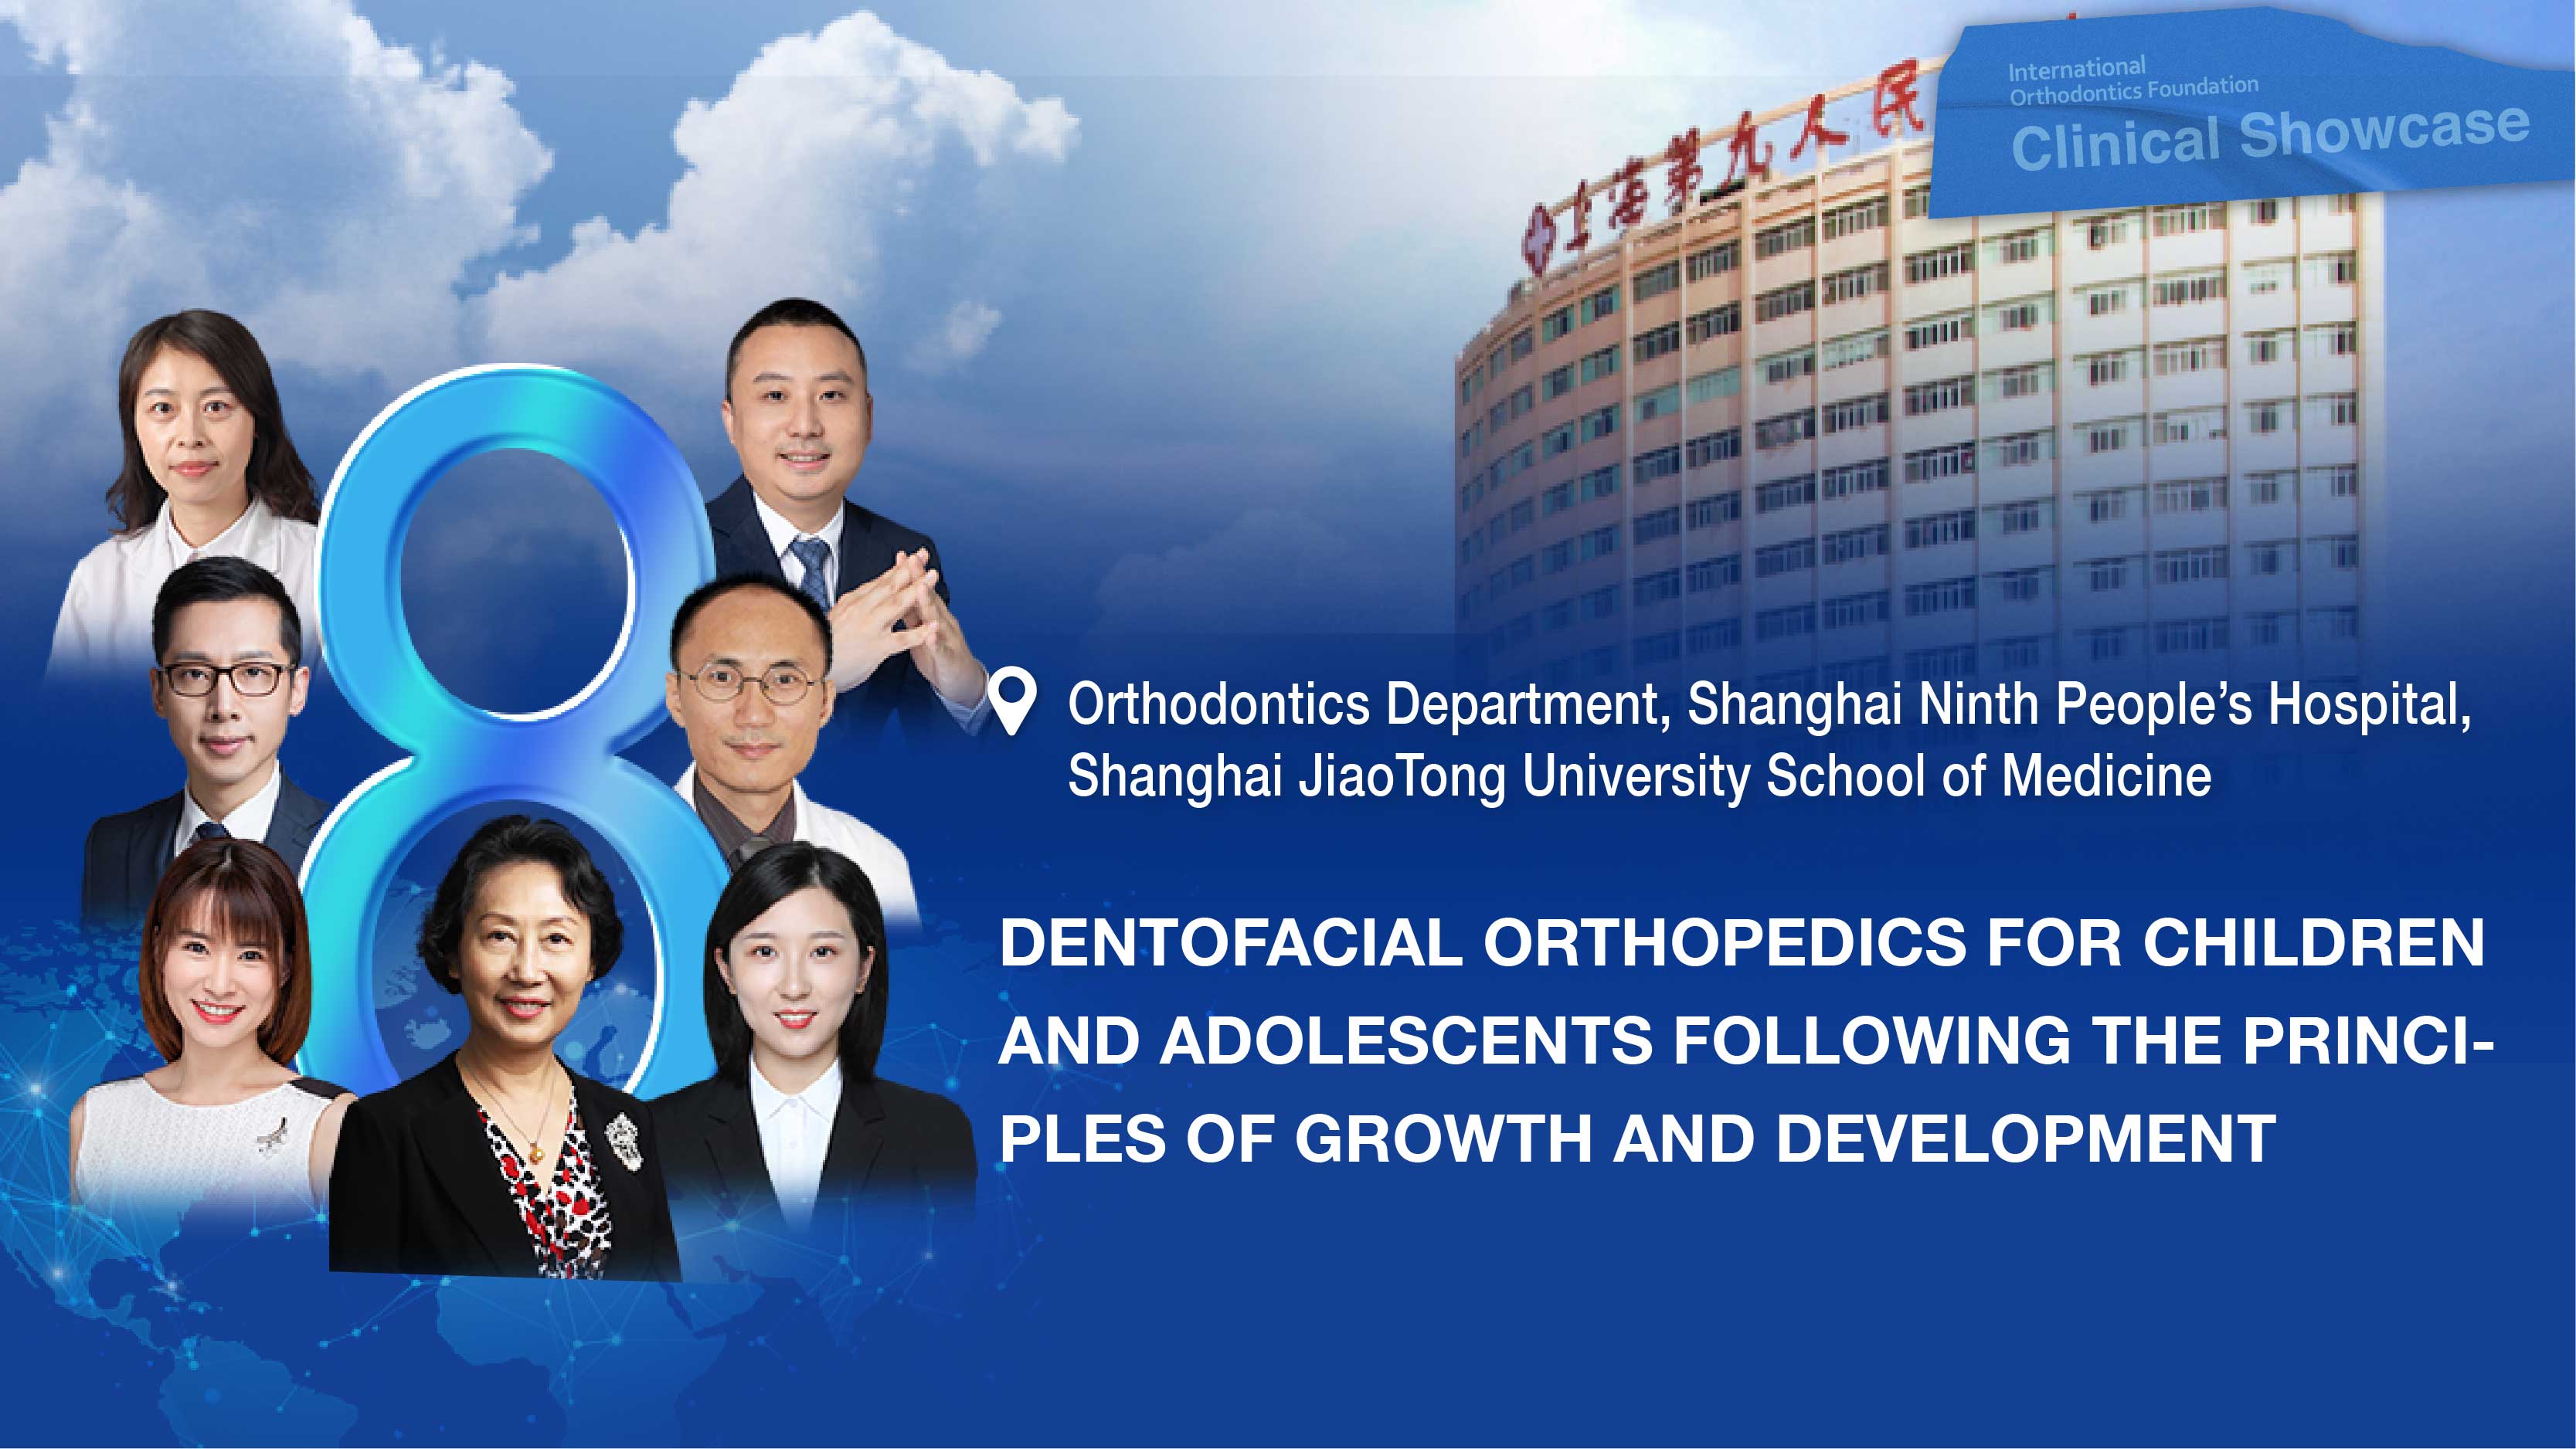 Dentofacial Orthopedics for Children and Adolescents Following the Principles of Growth and Development